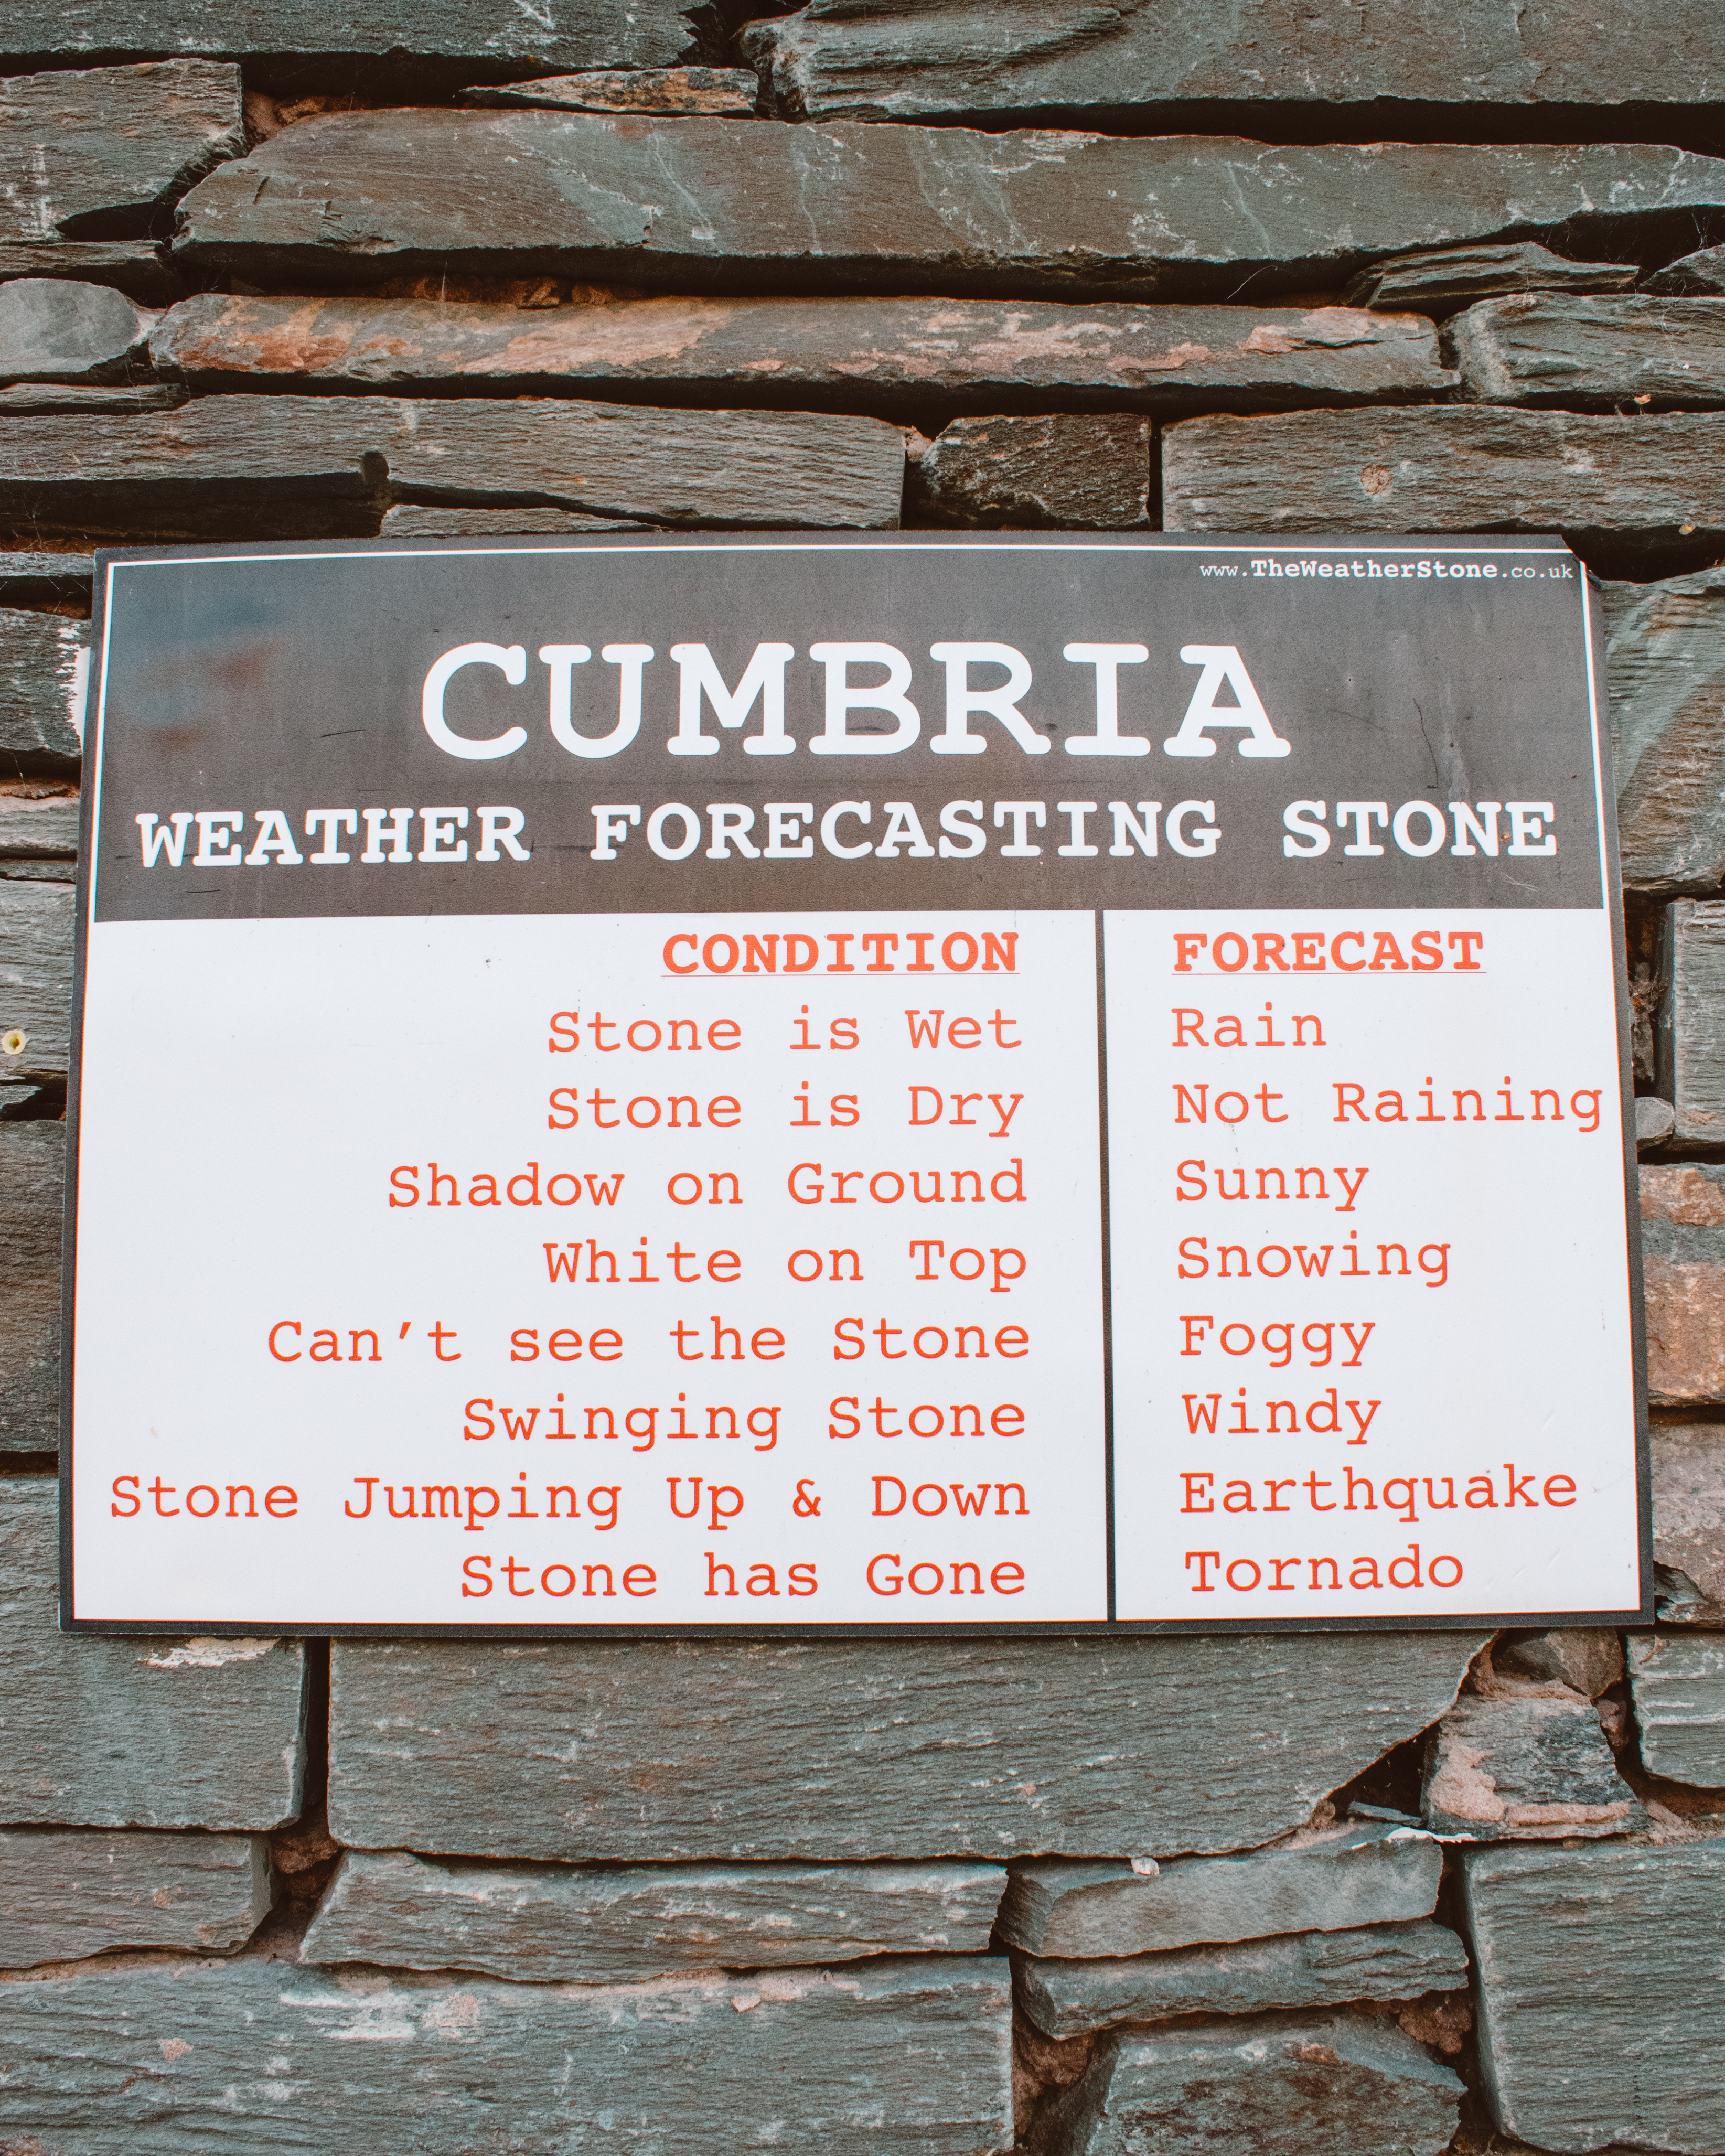 Funny sign about Cumbrian weather on a stone wall